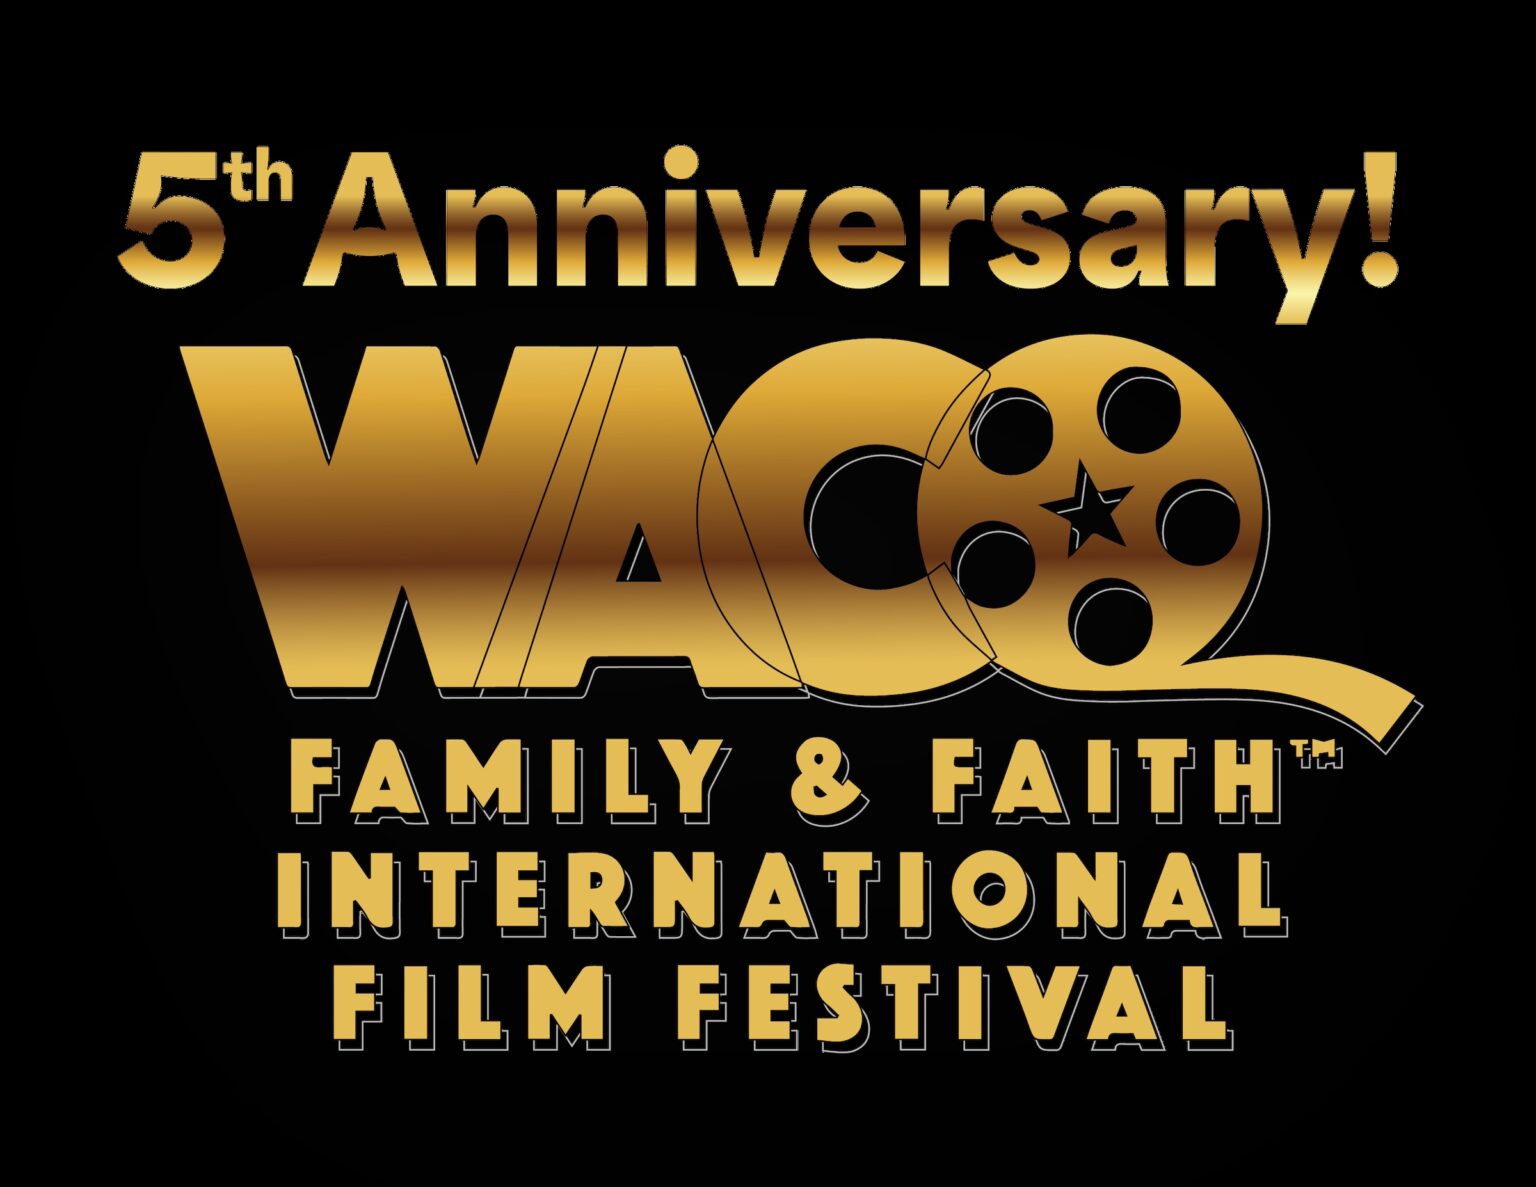 The Waco Family & Faith International Film Festival has finalized its event programming and film slate. Here's what we know.